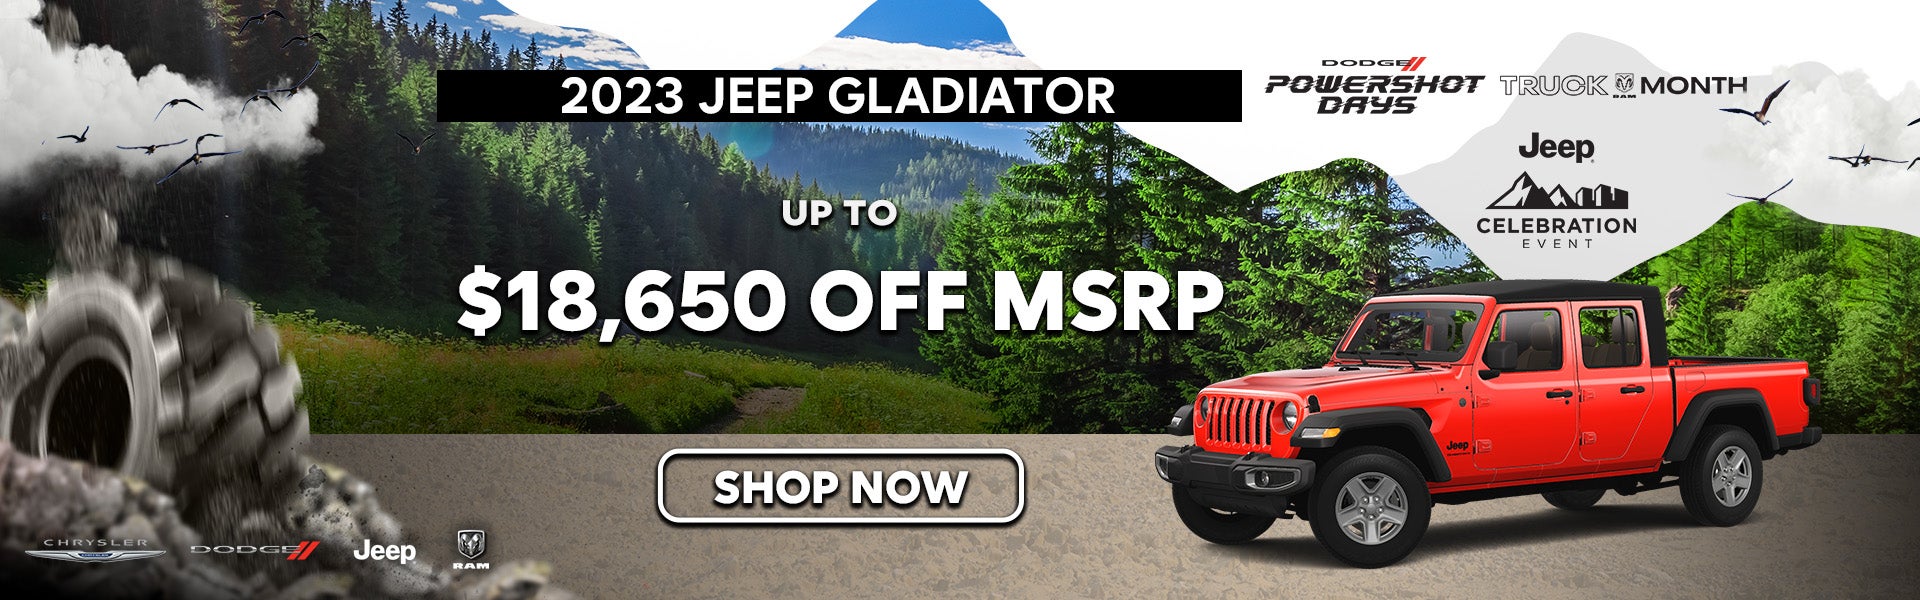 2023 JEEP GLADIATOR SPECIAL OFFER